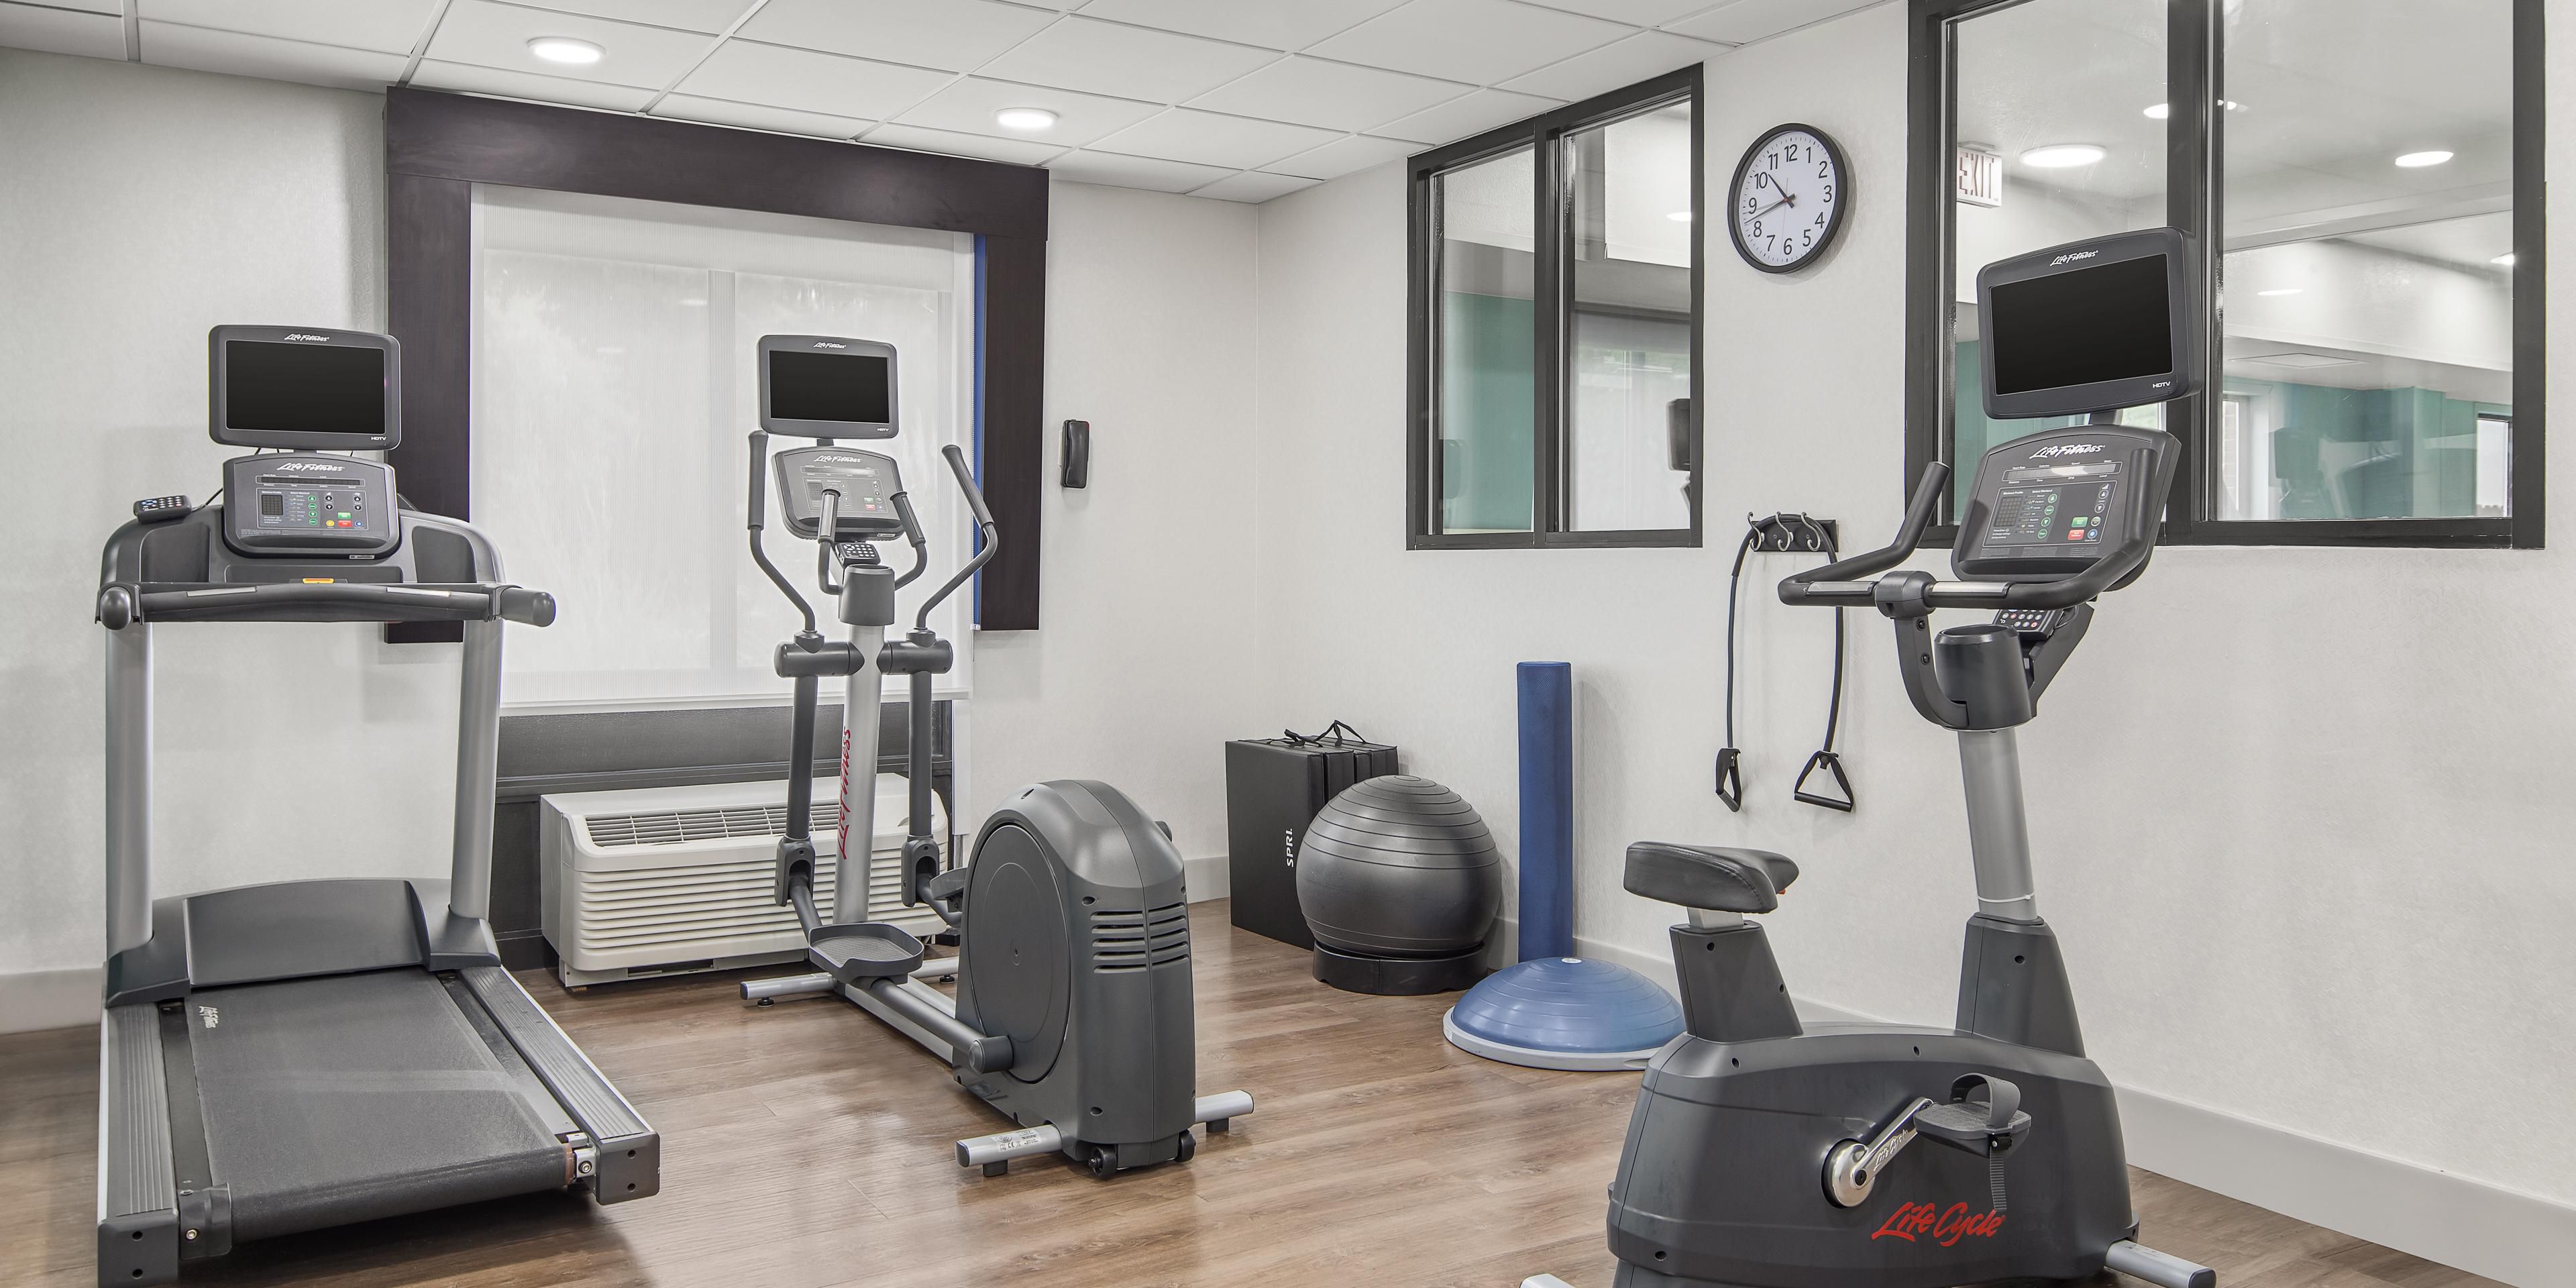 Our 24-hour fitness room is ready for whenever you are. Maybe you're an early riser and like to start the day off with a five miler, or right before bed helps you wind down and get some shut eye. Whatever your routine, we've got you covered! Free weights, treadmills, elliptical, and stationary bike. It is all here waiting for you!